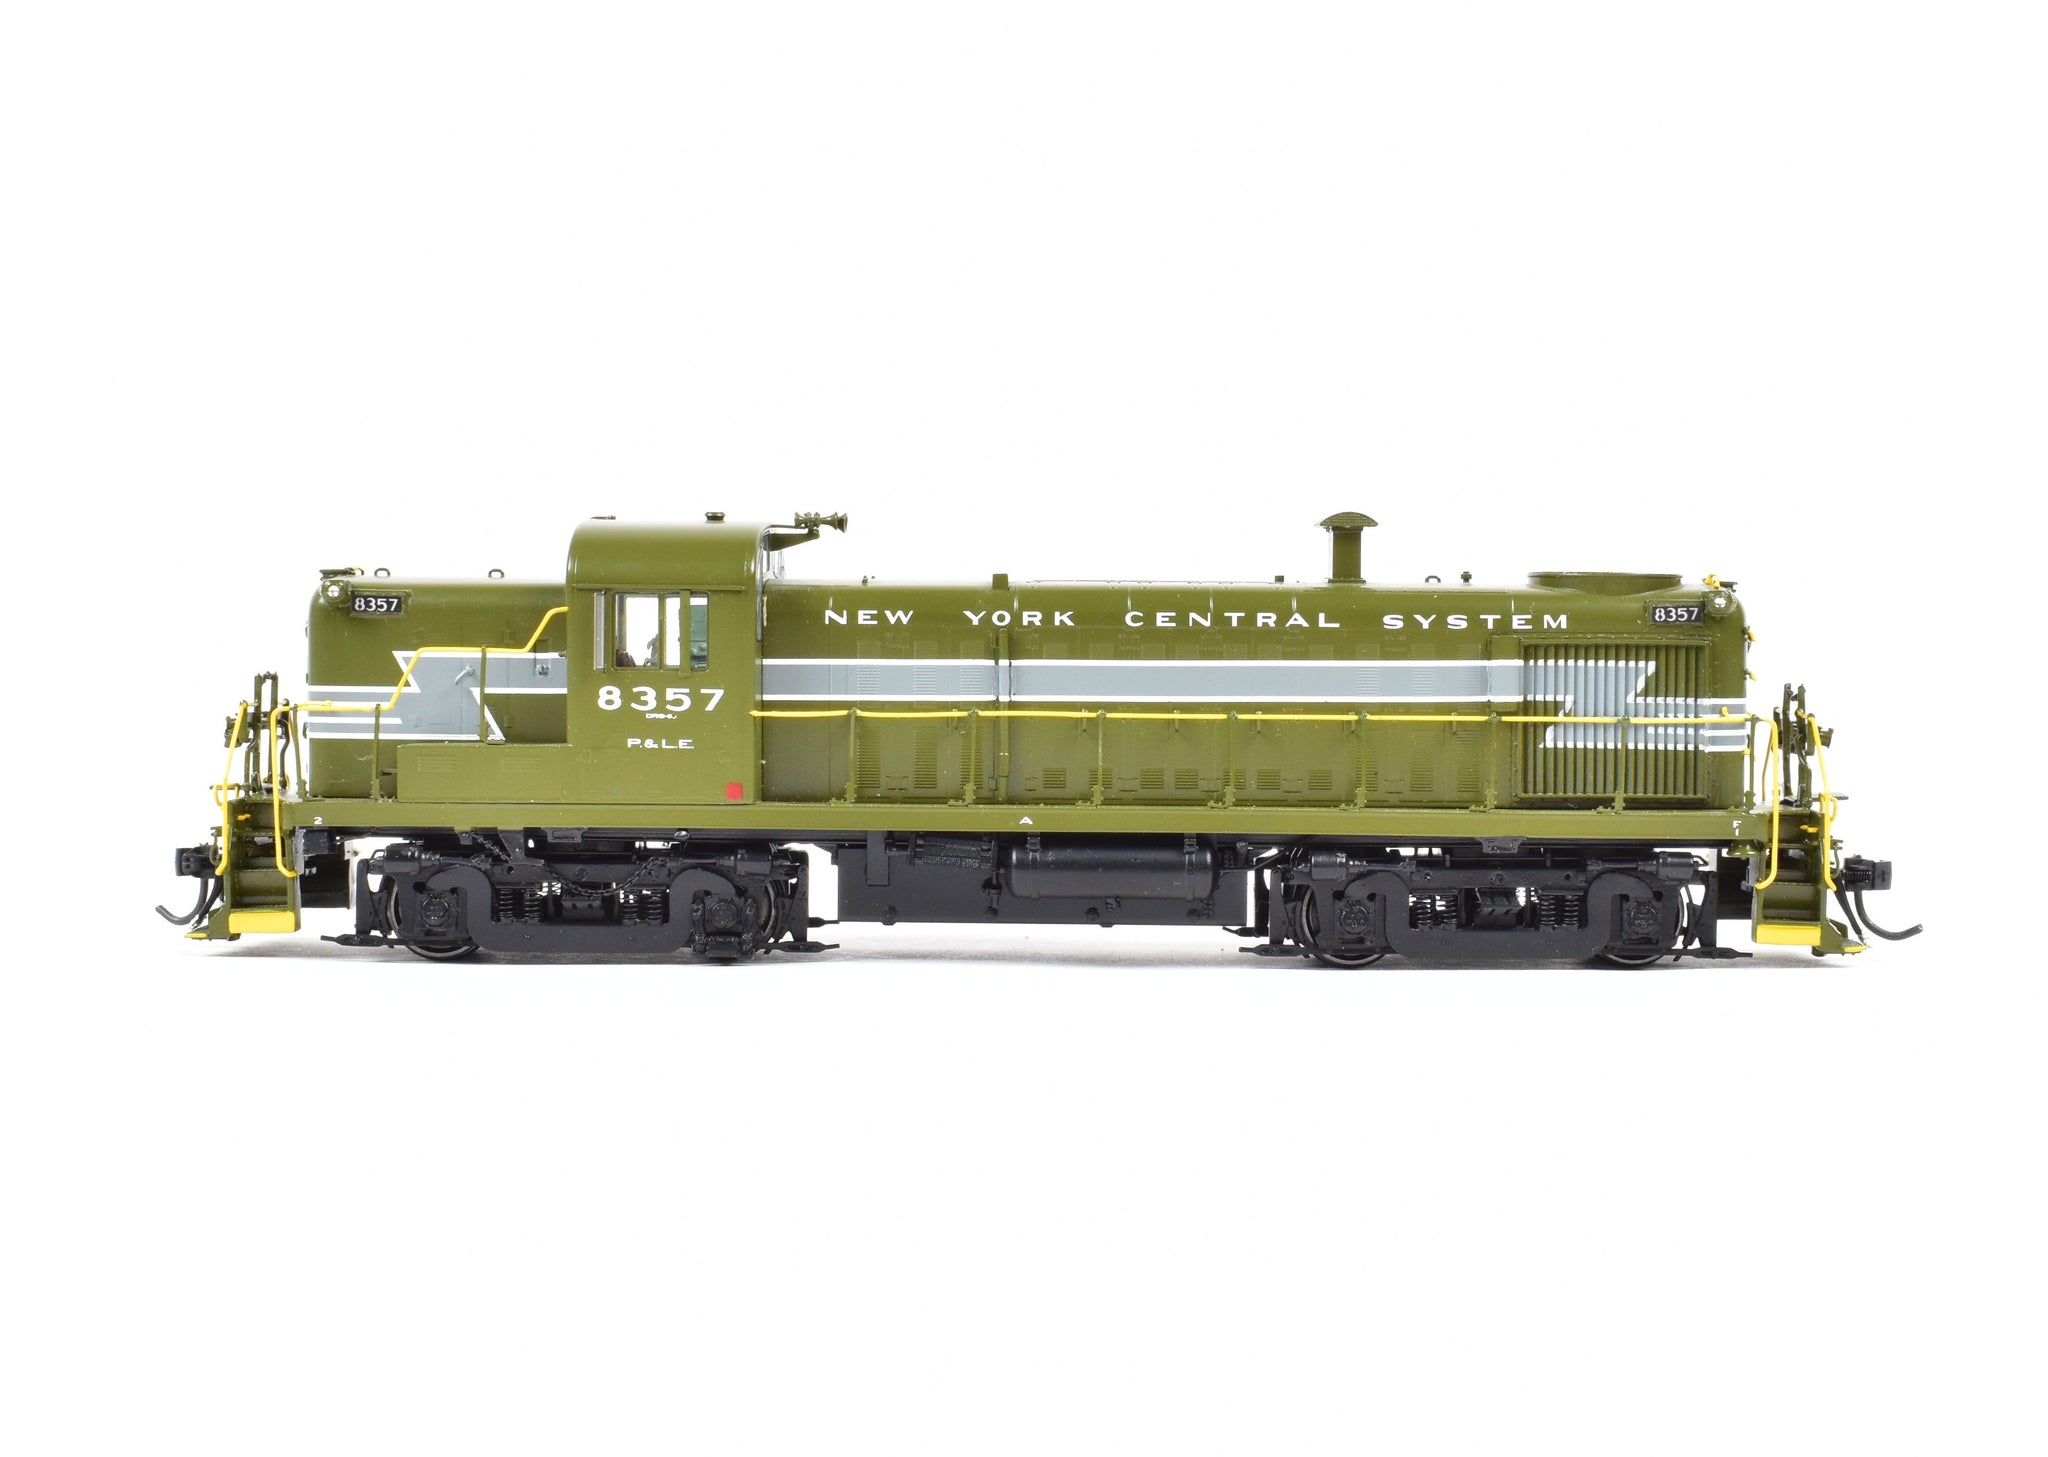 HO Brass CON OMI - Overland Models, Inc. P&LE - Pittsburgh & Lake 